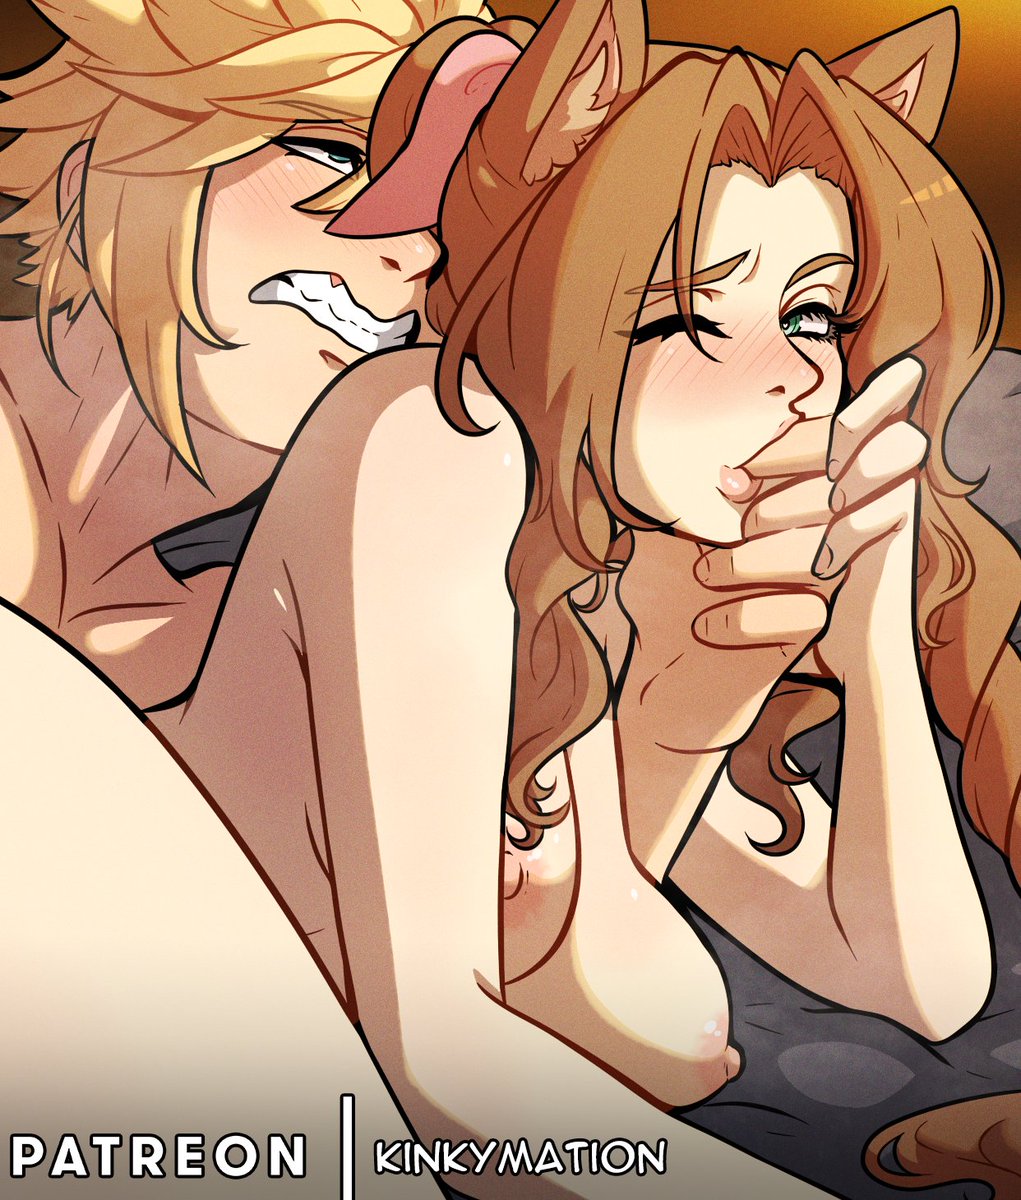 She knows what he likes! if you wanna see this full pic with some human and textless alts, check out the link in my bio!